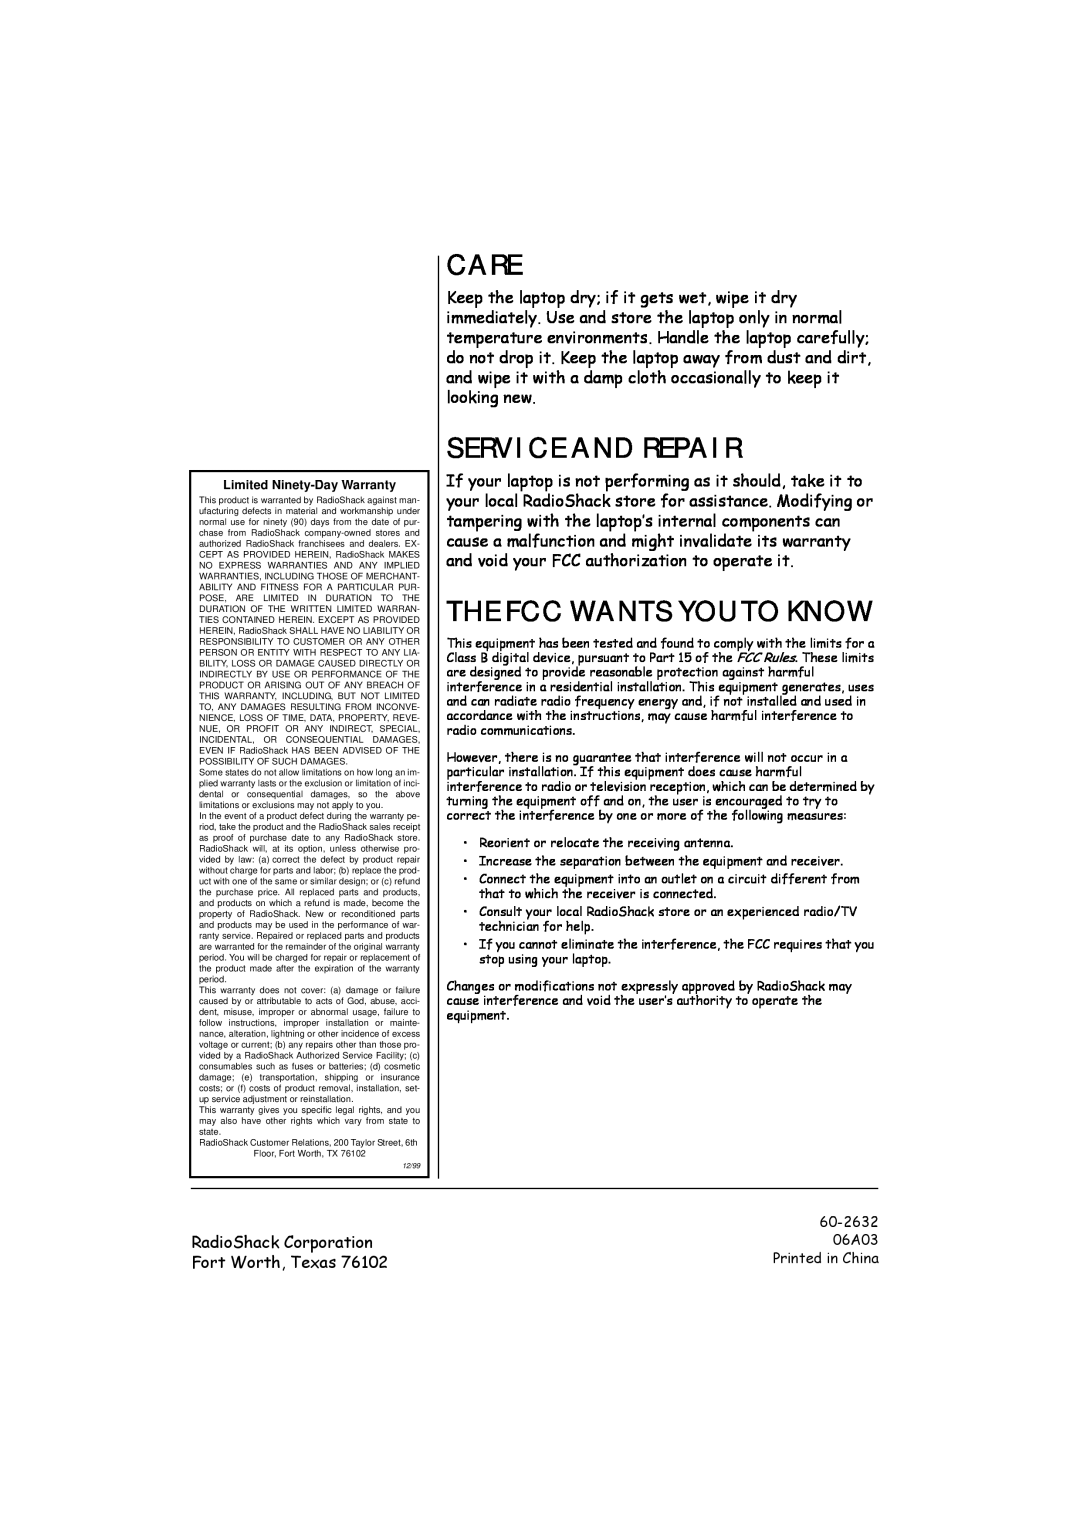 Radio Shack 60-2632 owner manual Care, Service And Repair, The Fcc Wants You To Know, 06A03, Printed in China 